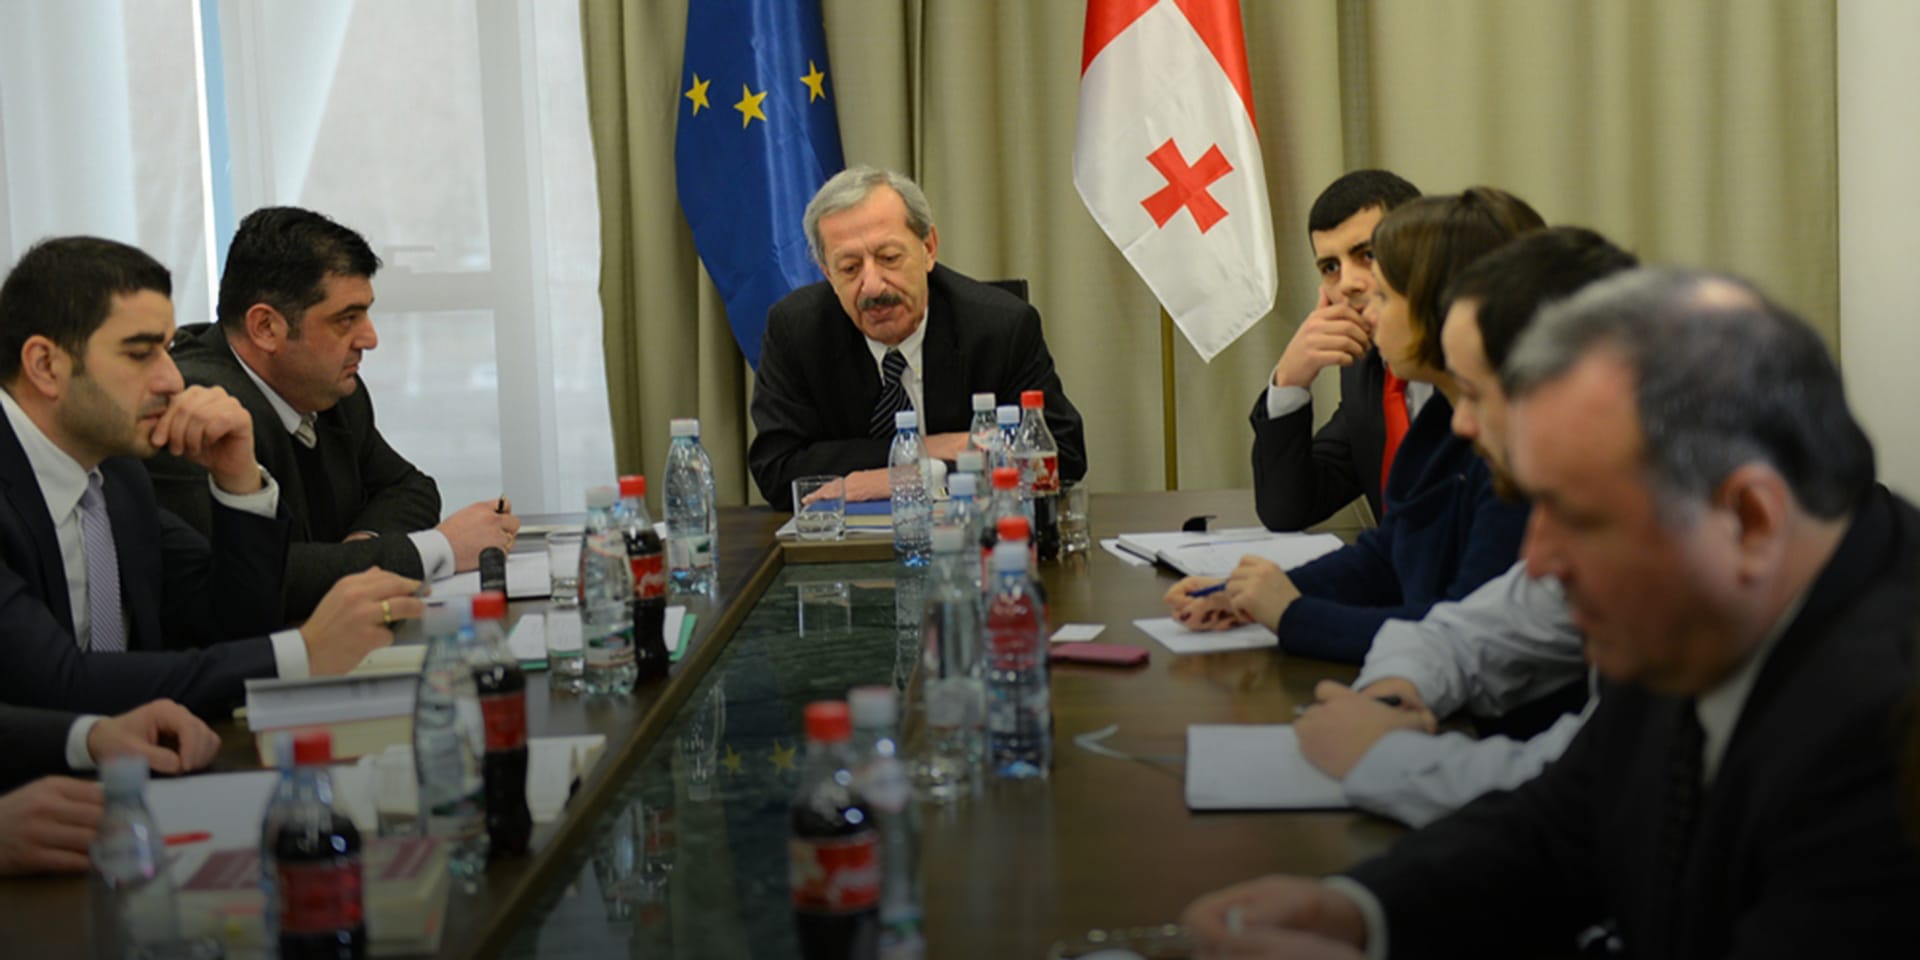 Image of a group of businesspeople having a meeting at a large table with the flags of the EU and Georgia in the background.